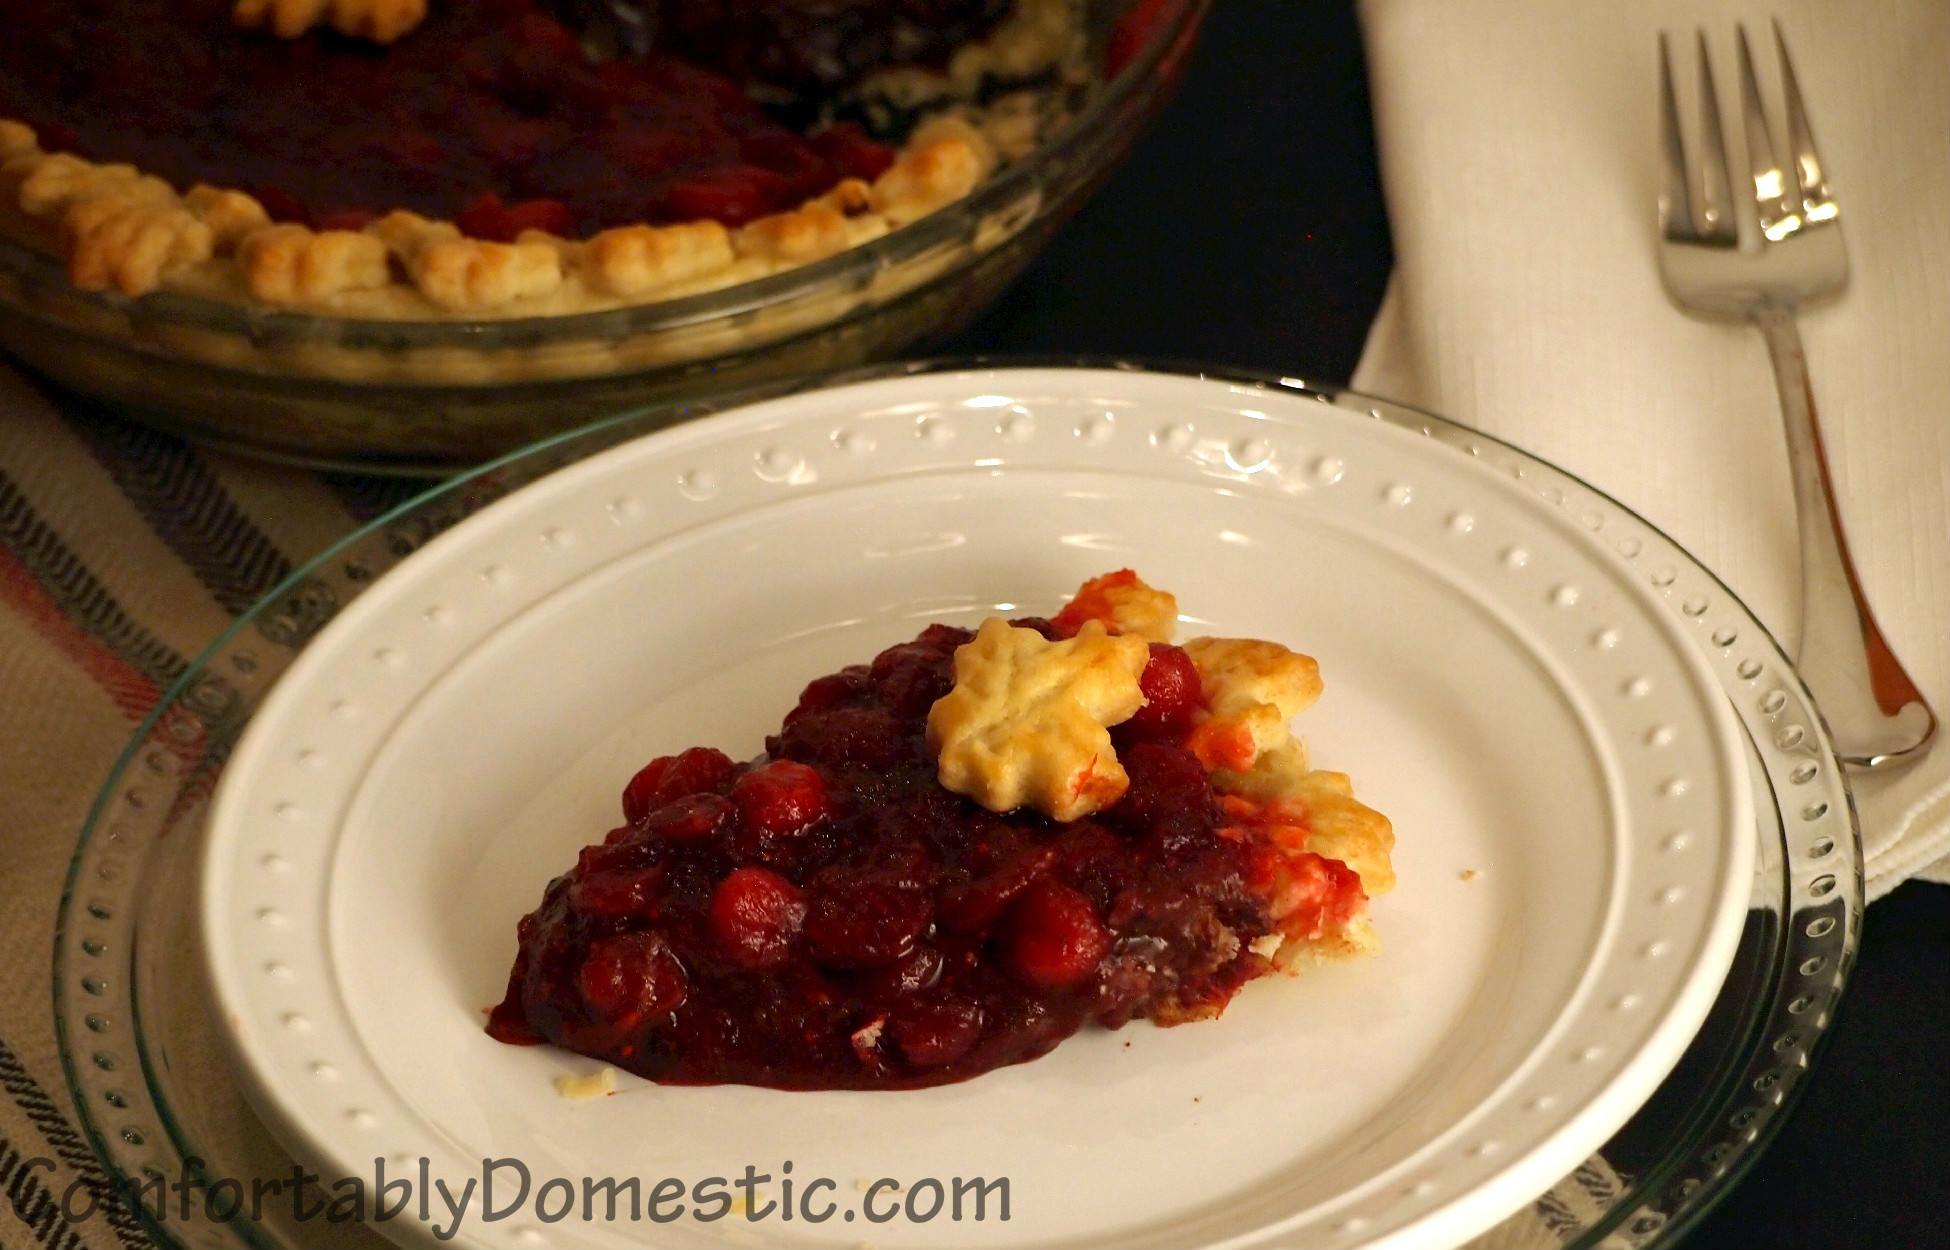 Dark chocolate cranberry pie may become your new favorite holiday pie recipe! Dark chocolate pie, topped with tart, fresh cranberry sauce, all baked into a flaky pie crust.